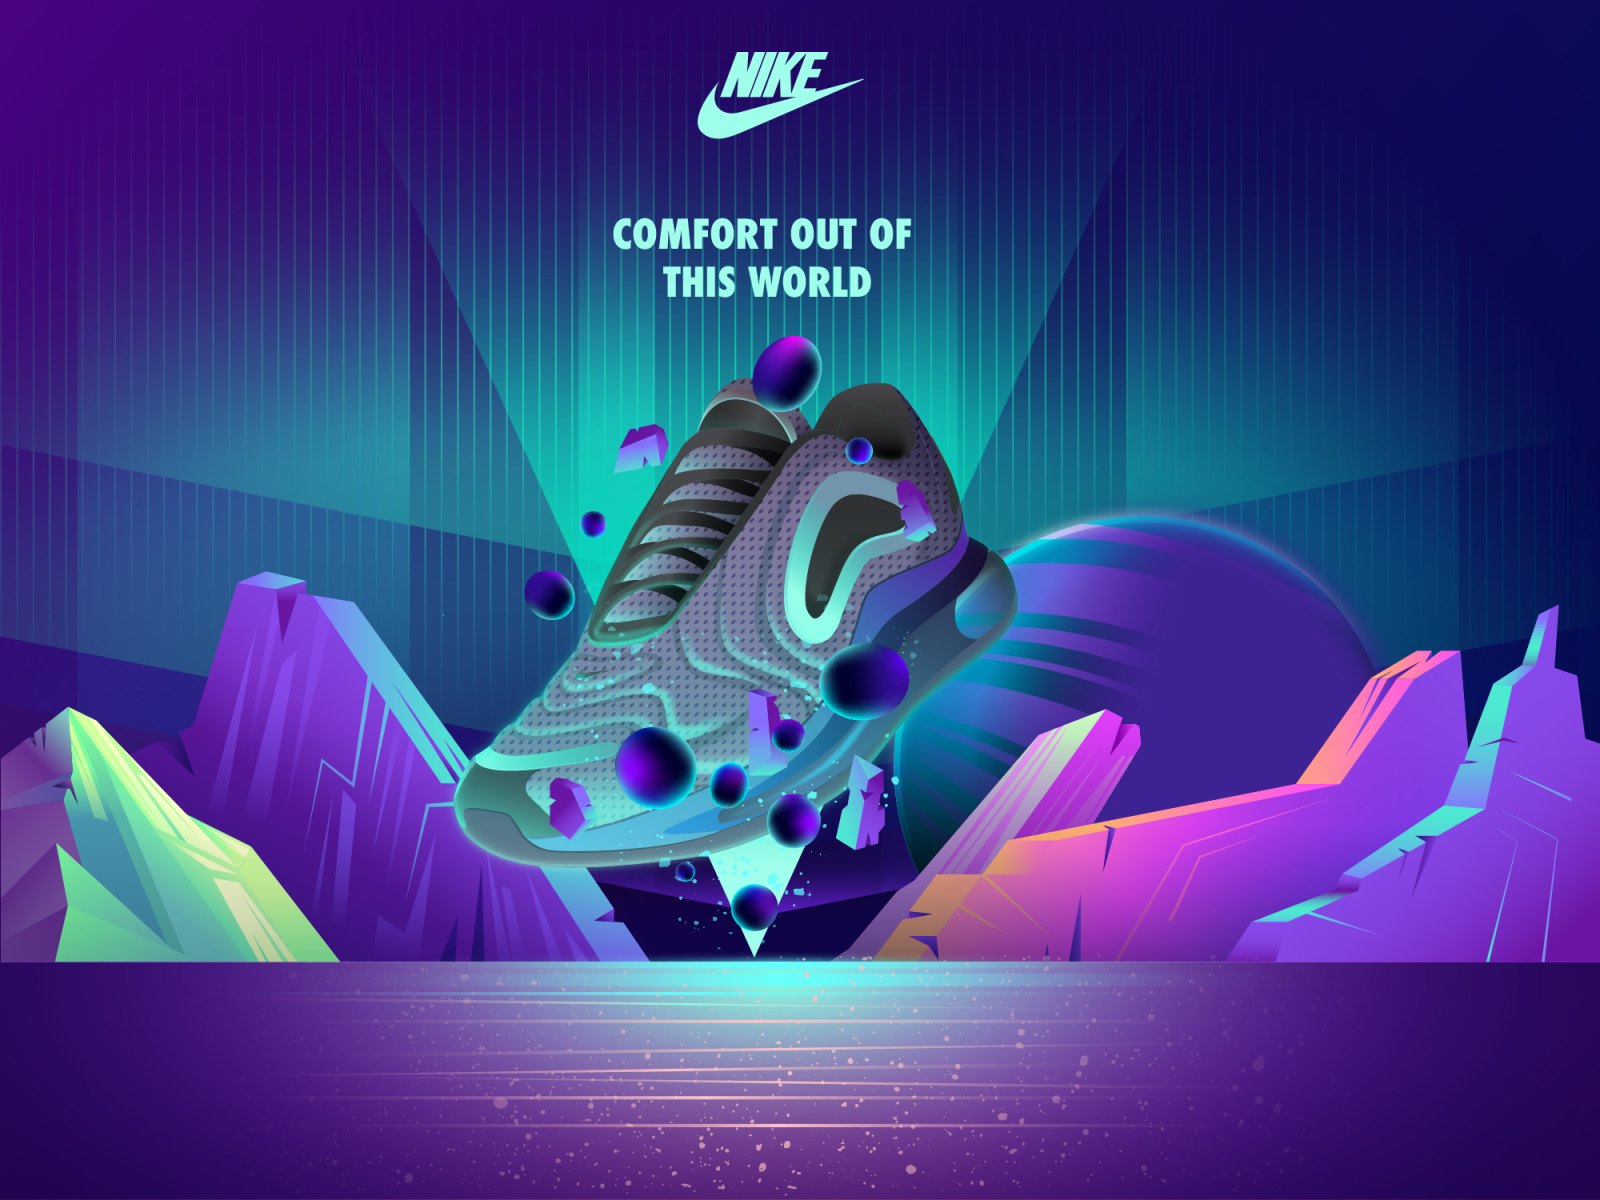 Nike - Comfort out of this world by Miloš Prokić on Dribbble